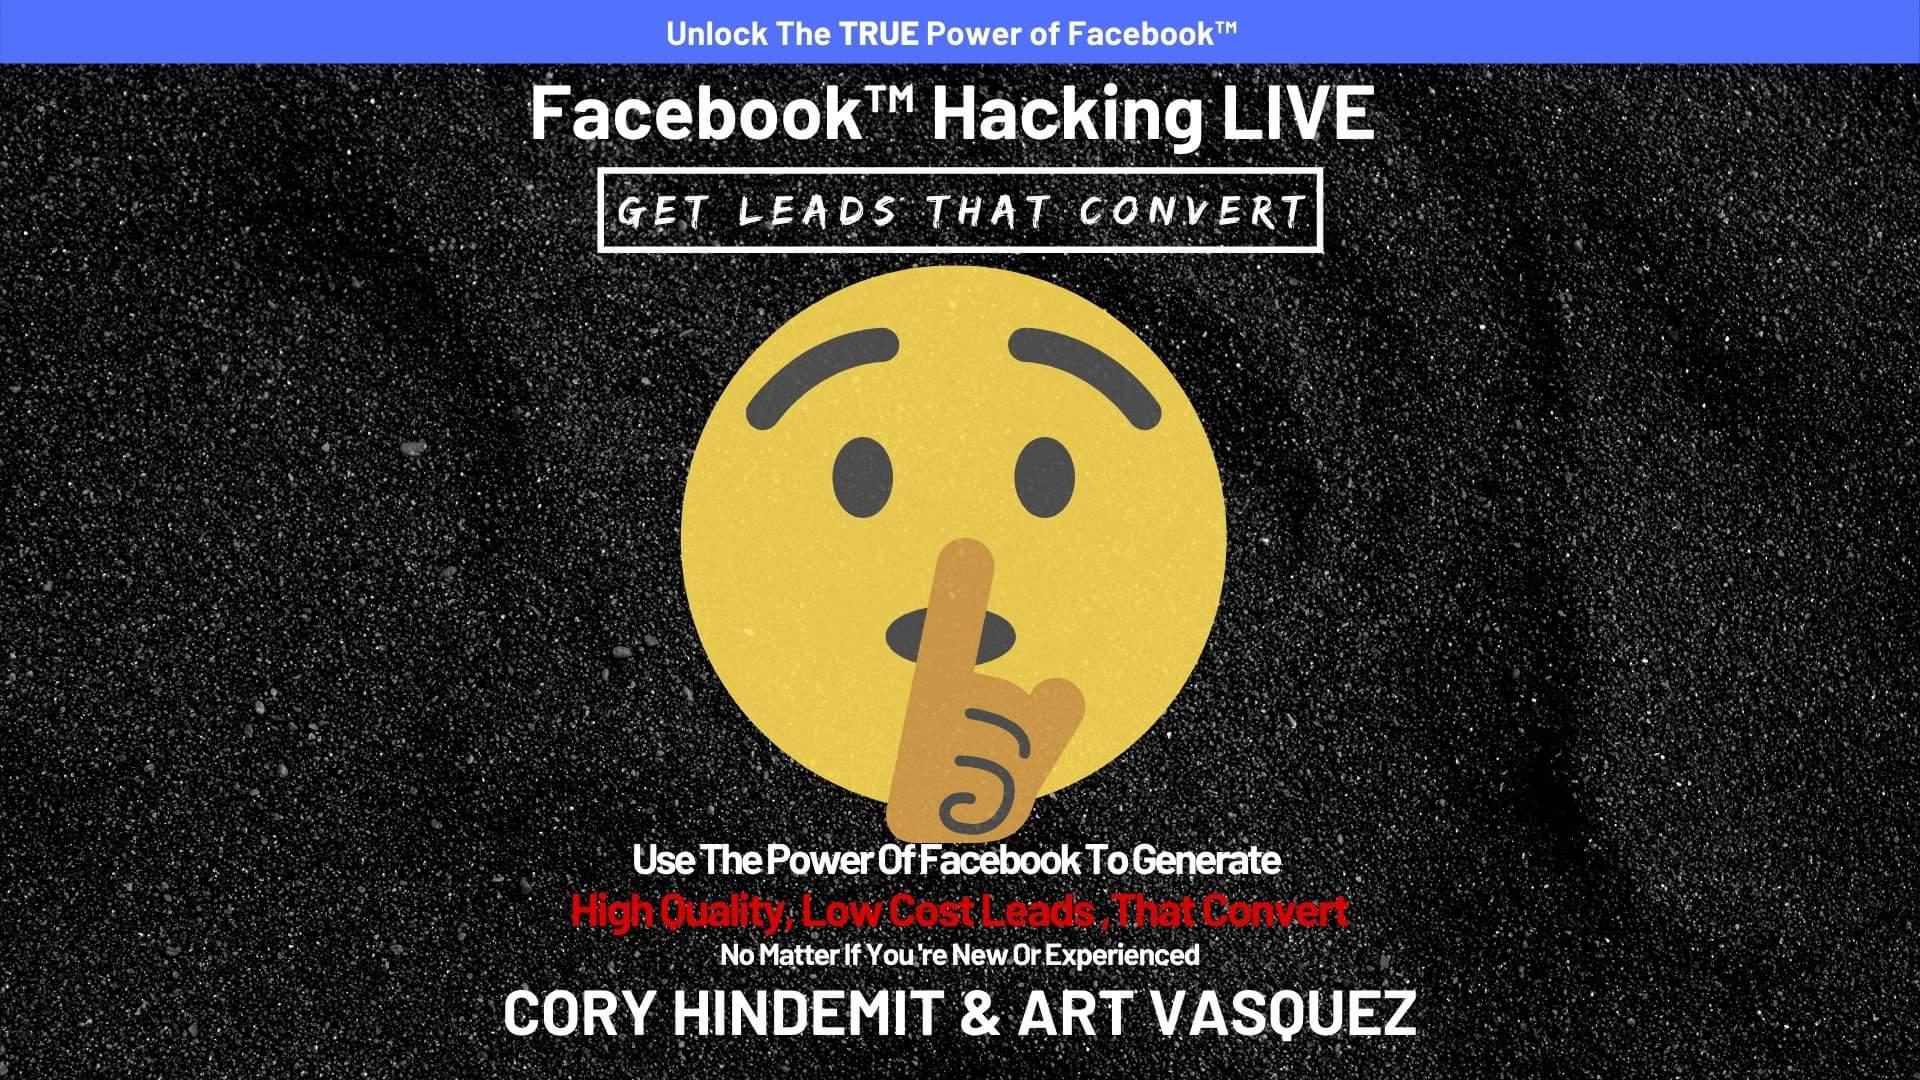 Facebook Hacking Live - Get Real Estate Leads that Convert